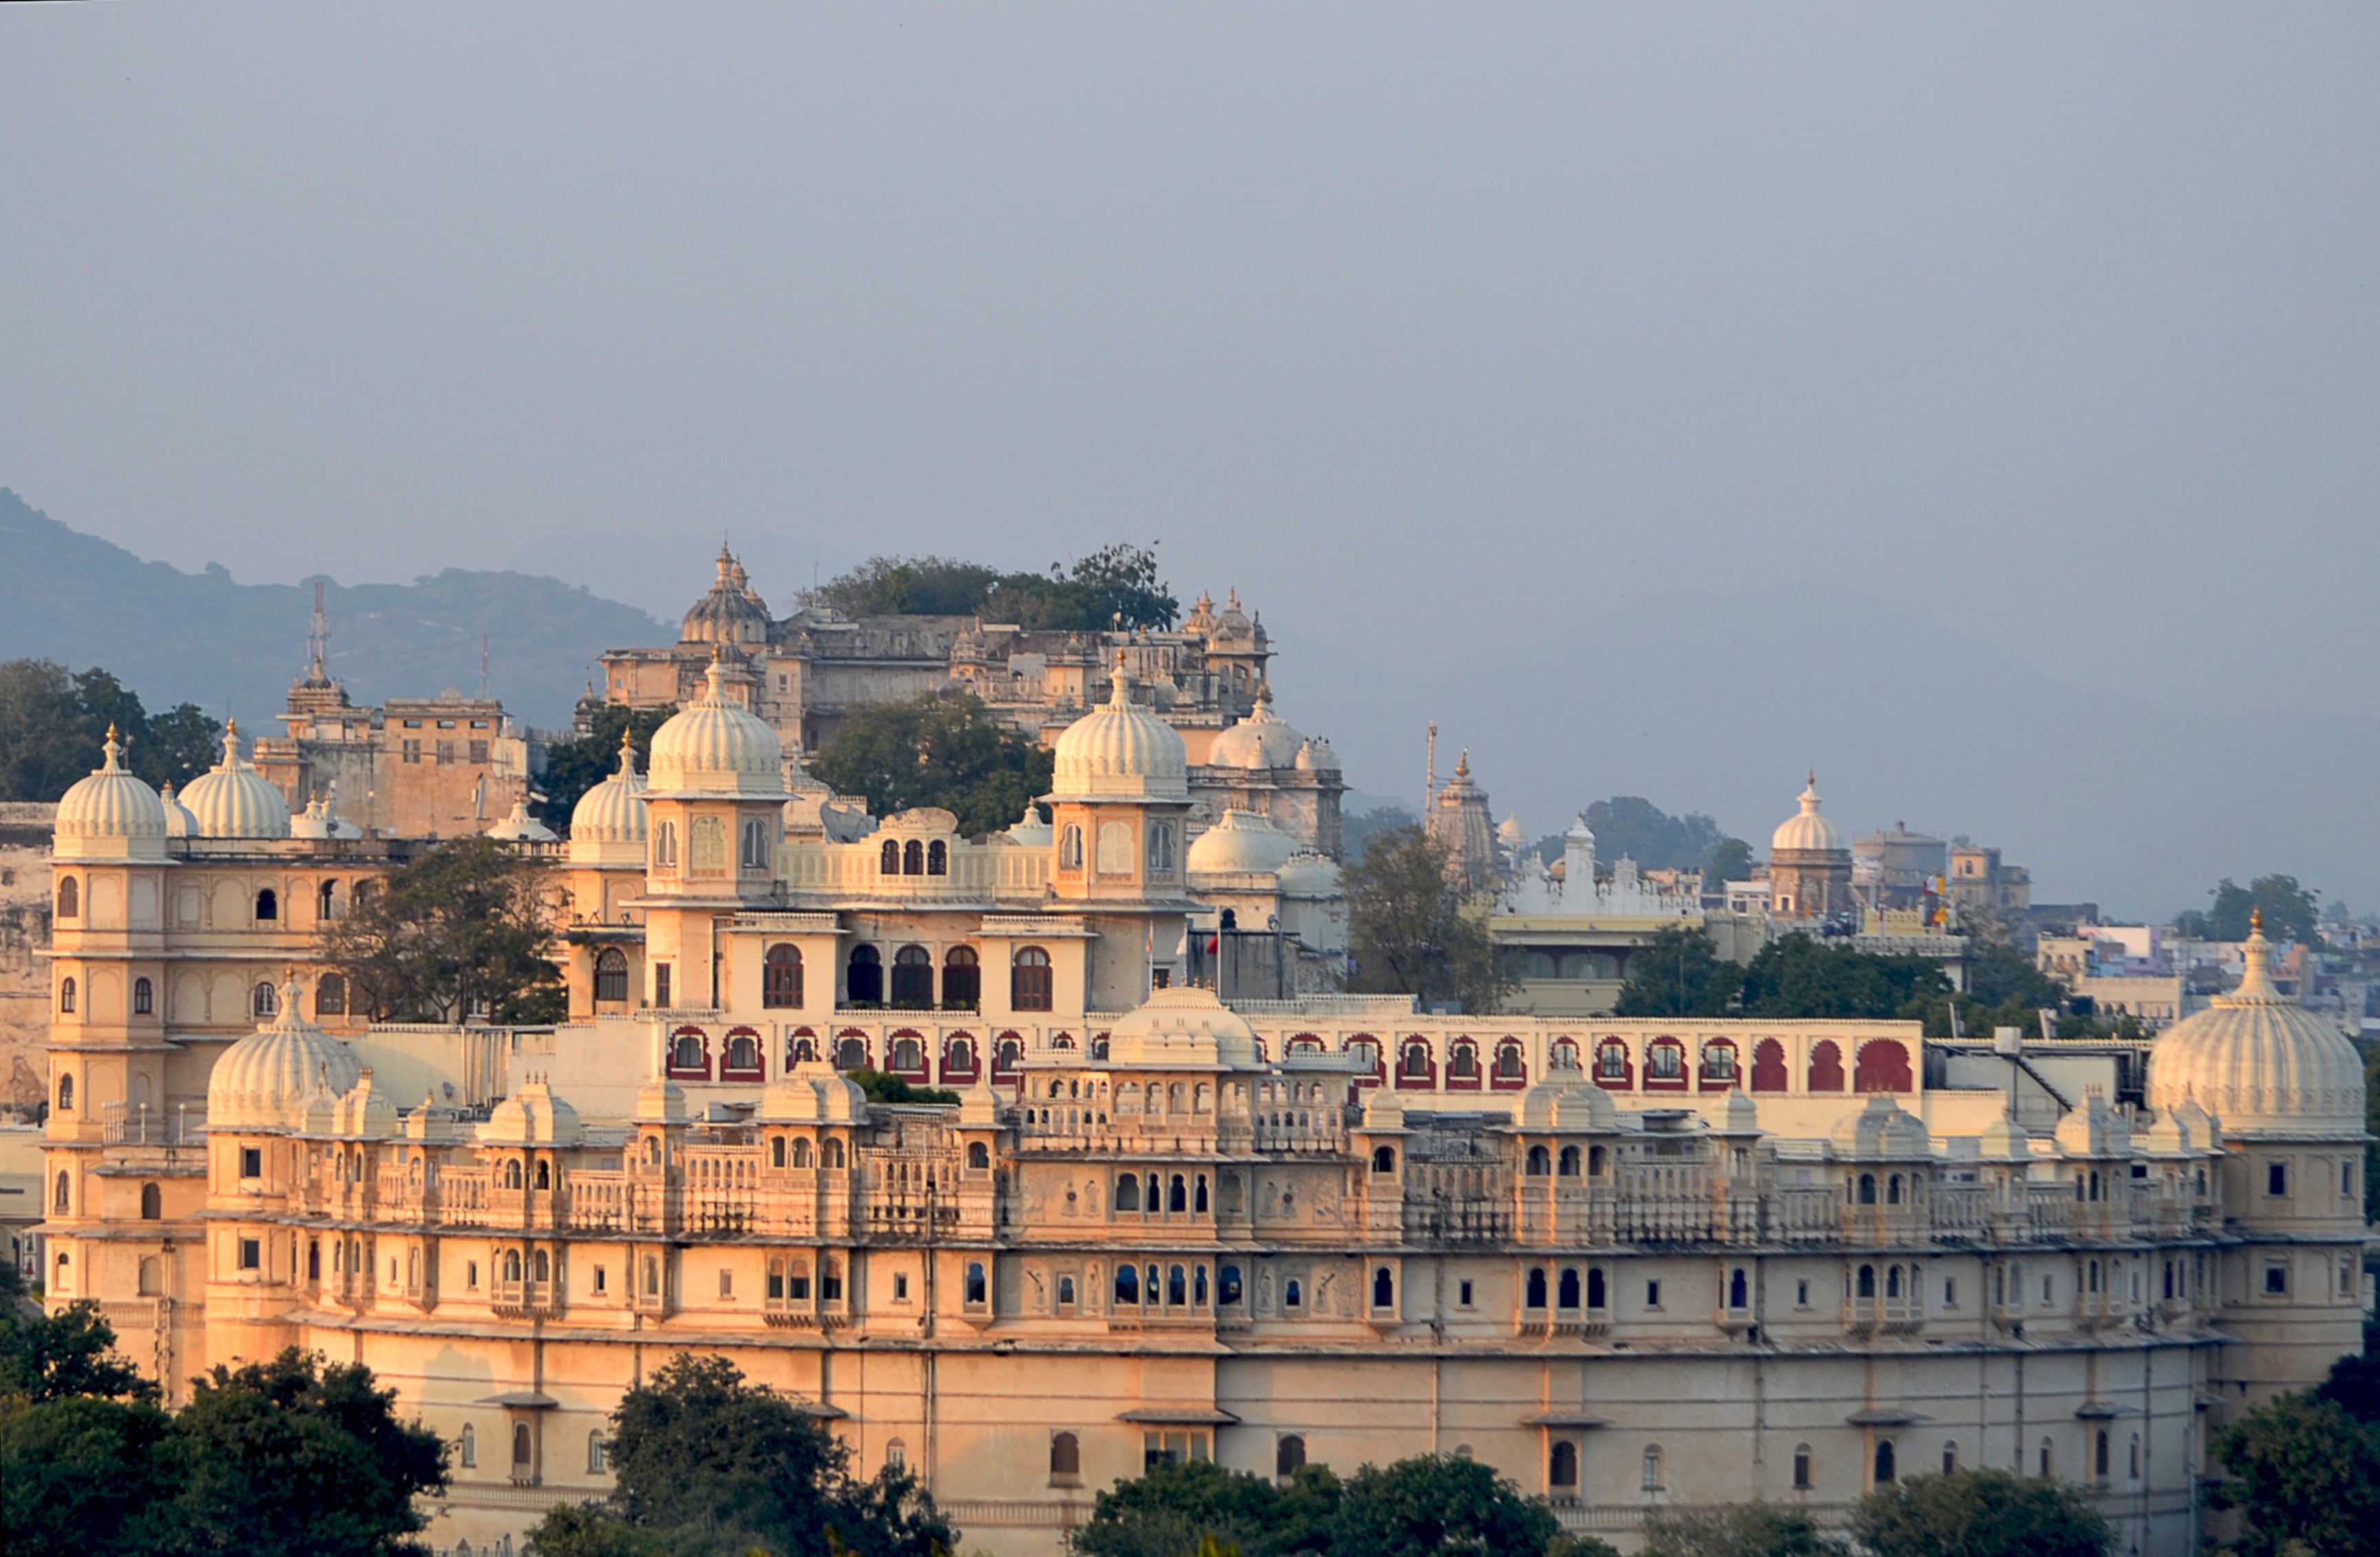 This wedding venue has stunning views and is located on the shores of Lake Pichola.  (Wikipedia)